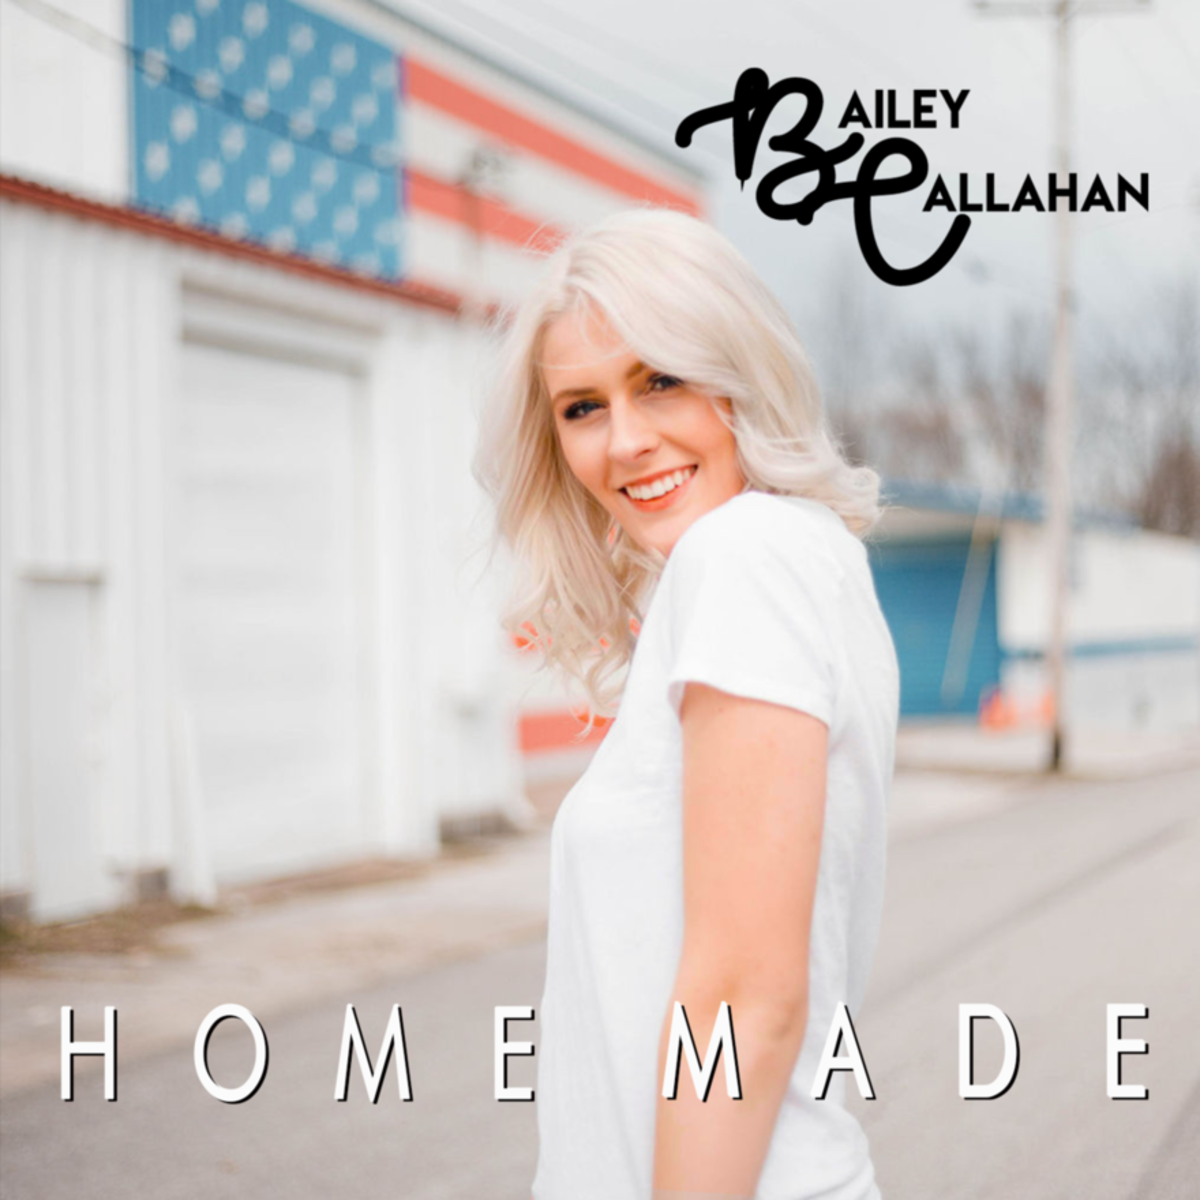 Country Music Artist Bailey Callahan Opens Up About Herself